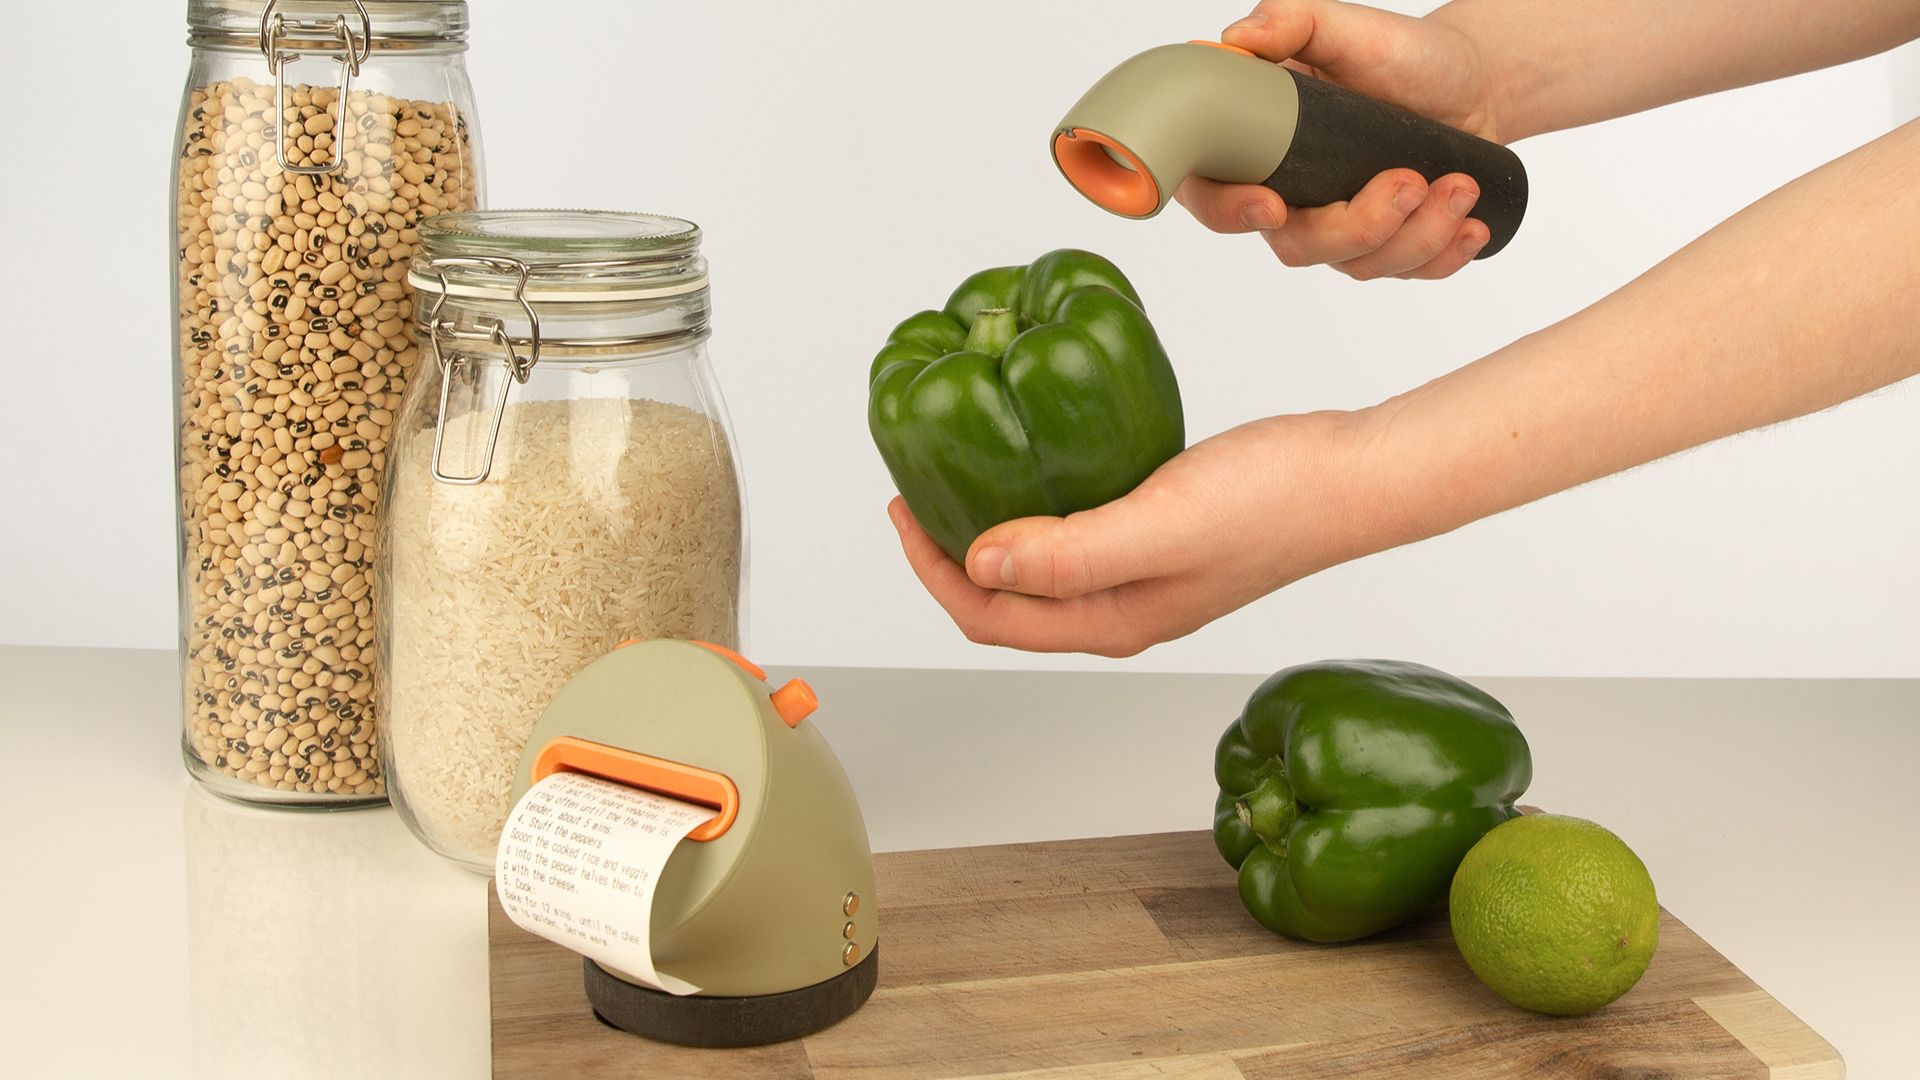 Sustainable Kitchen Products for an Eco-Friendly Home - New Darlings